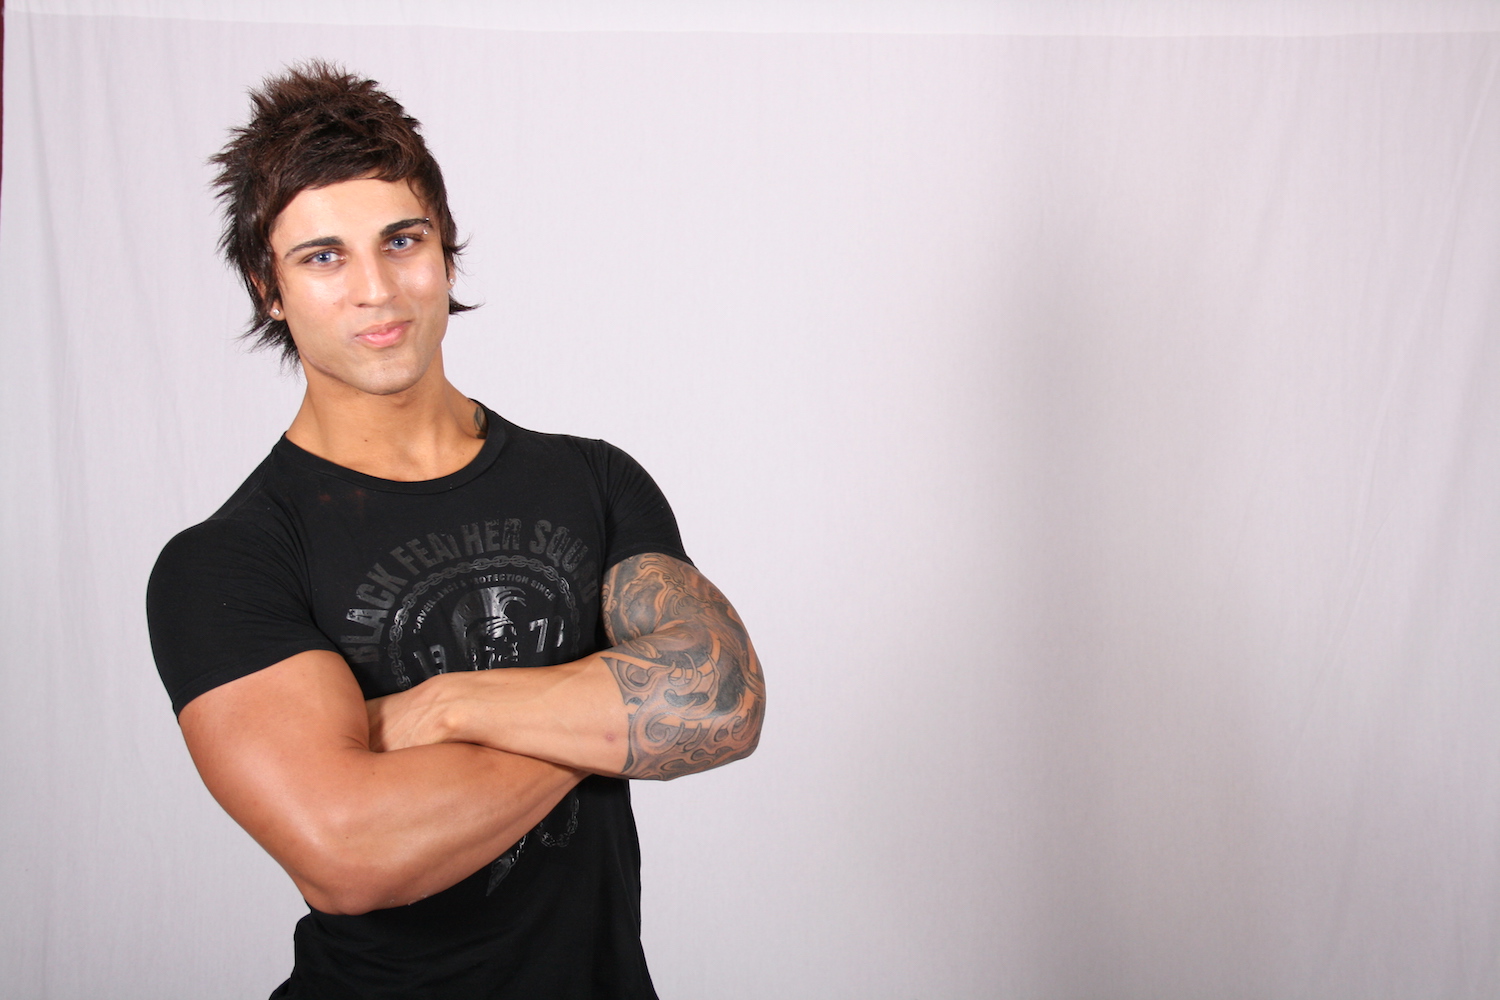 Death of zyzz cause How did